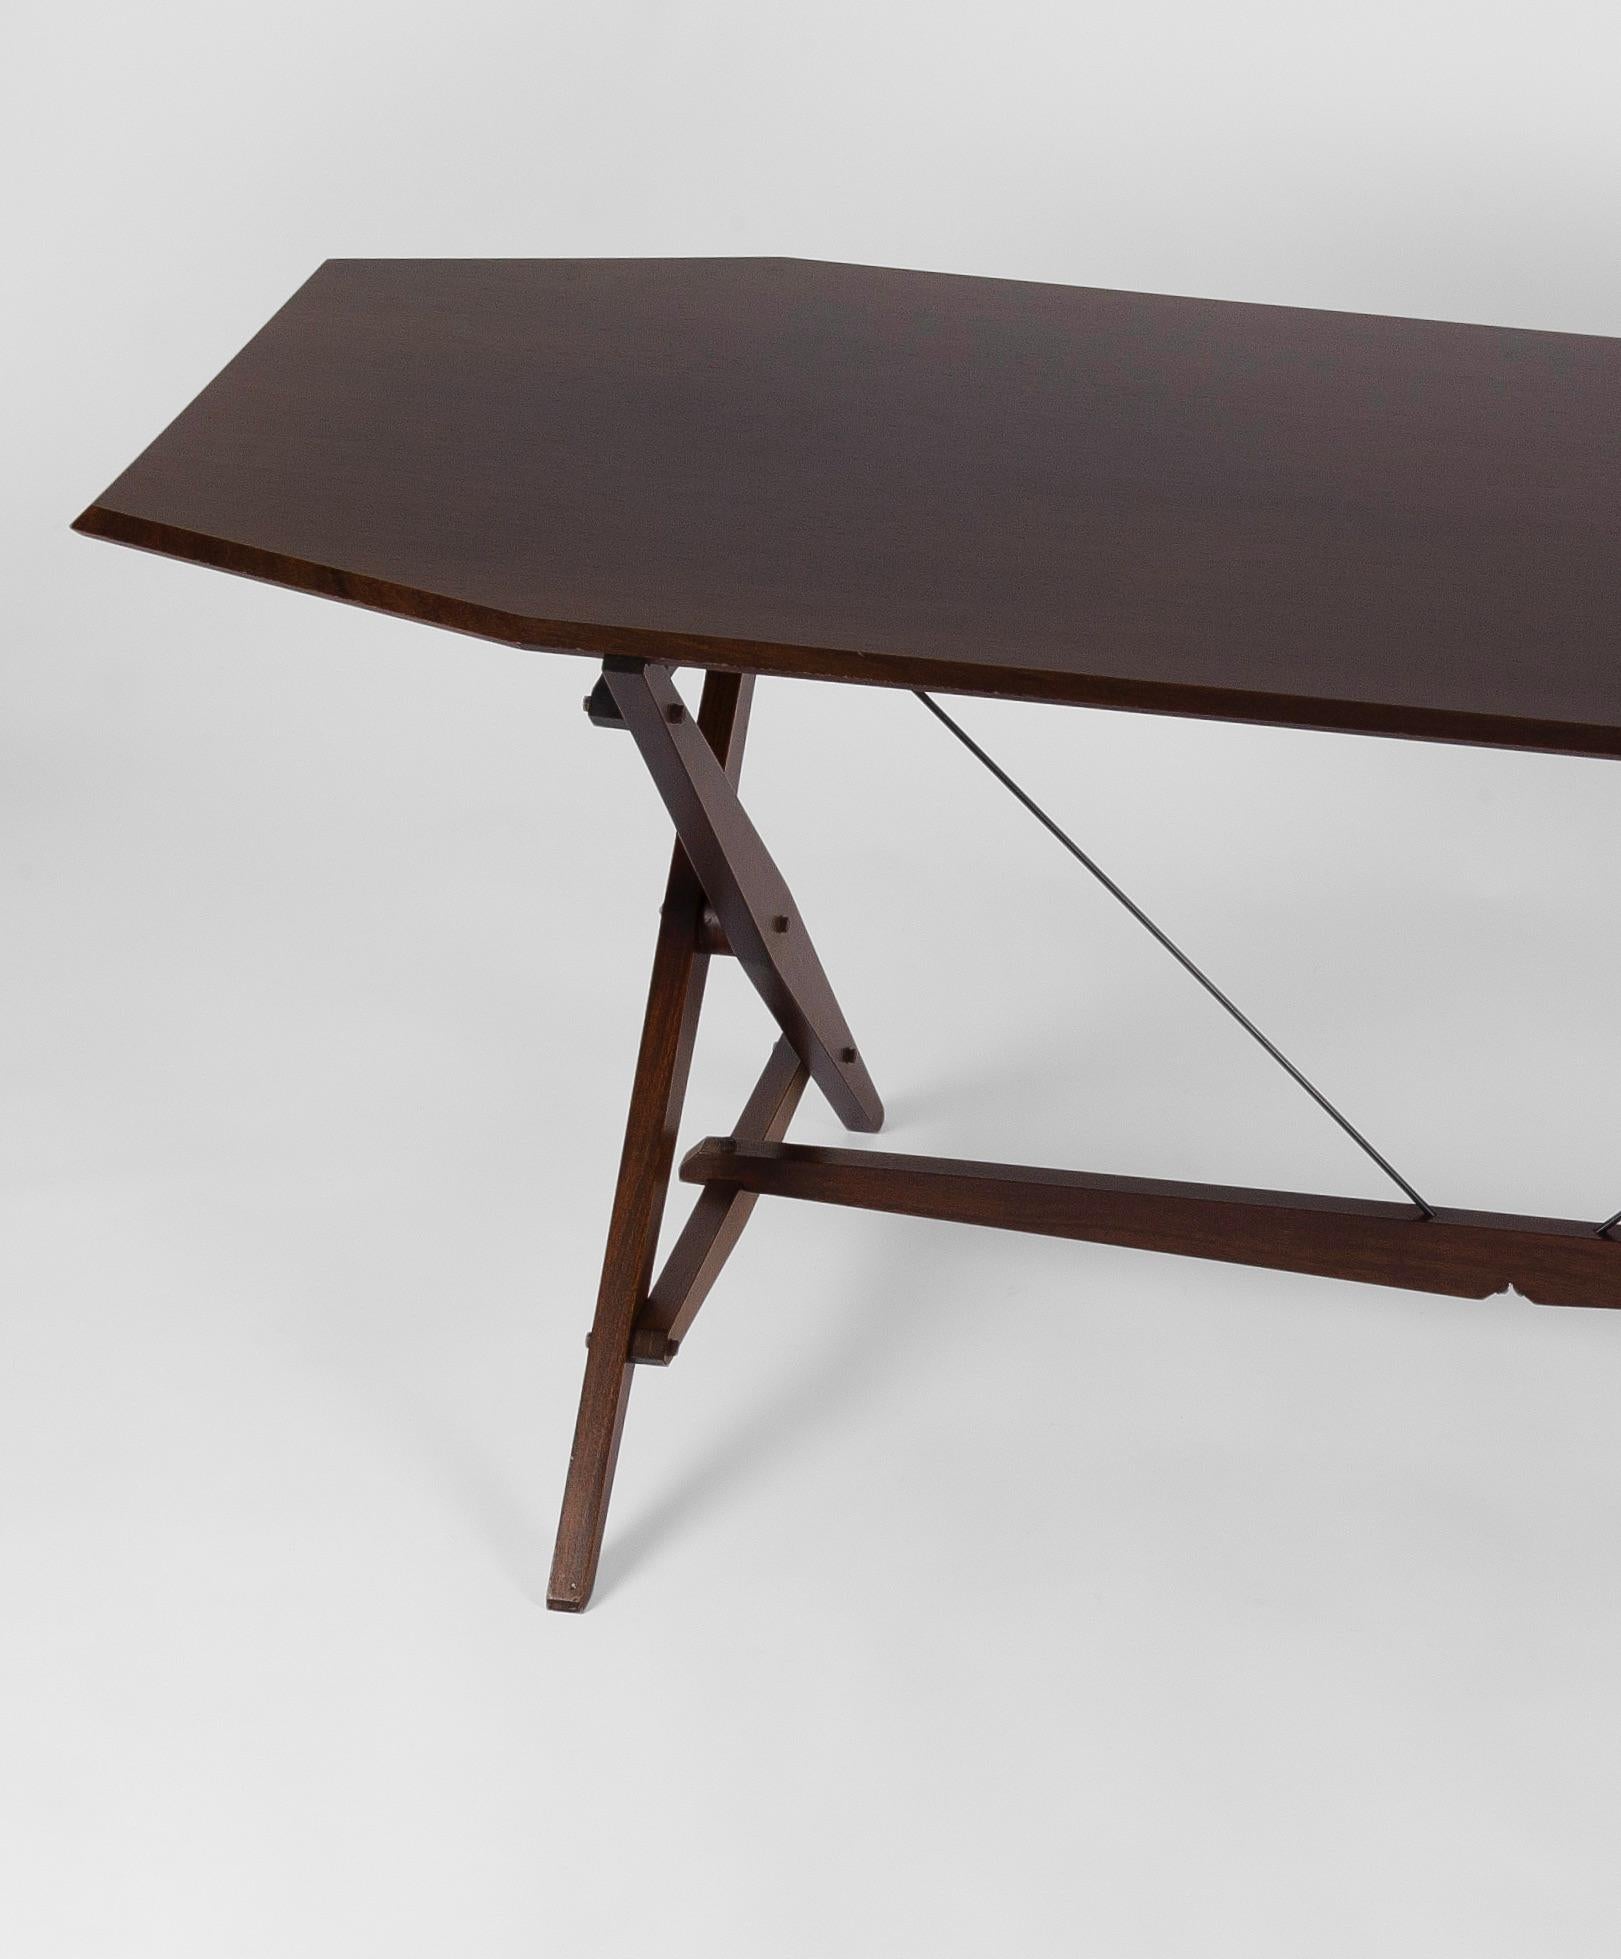 A rare mahogany version of the Cavaletto or TL2 table designed by the great neo-rationalist designer, Franco Albini. Designed in 1950 for manufacturers Poggi, the Cavaletto, (trestle), functions as both part table, part desk, with its beautifully